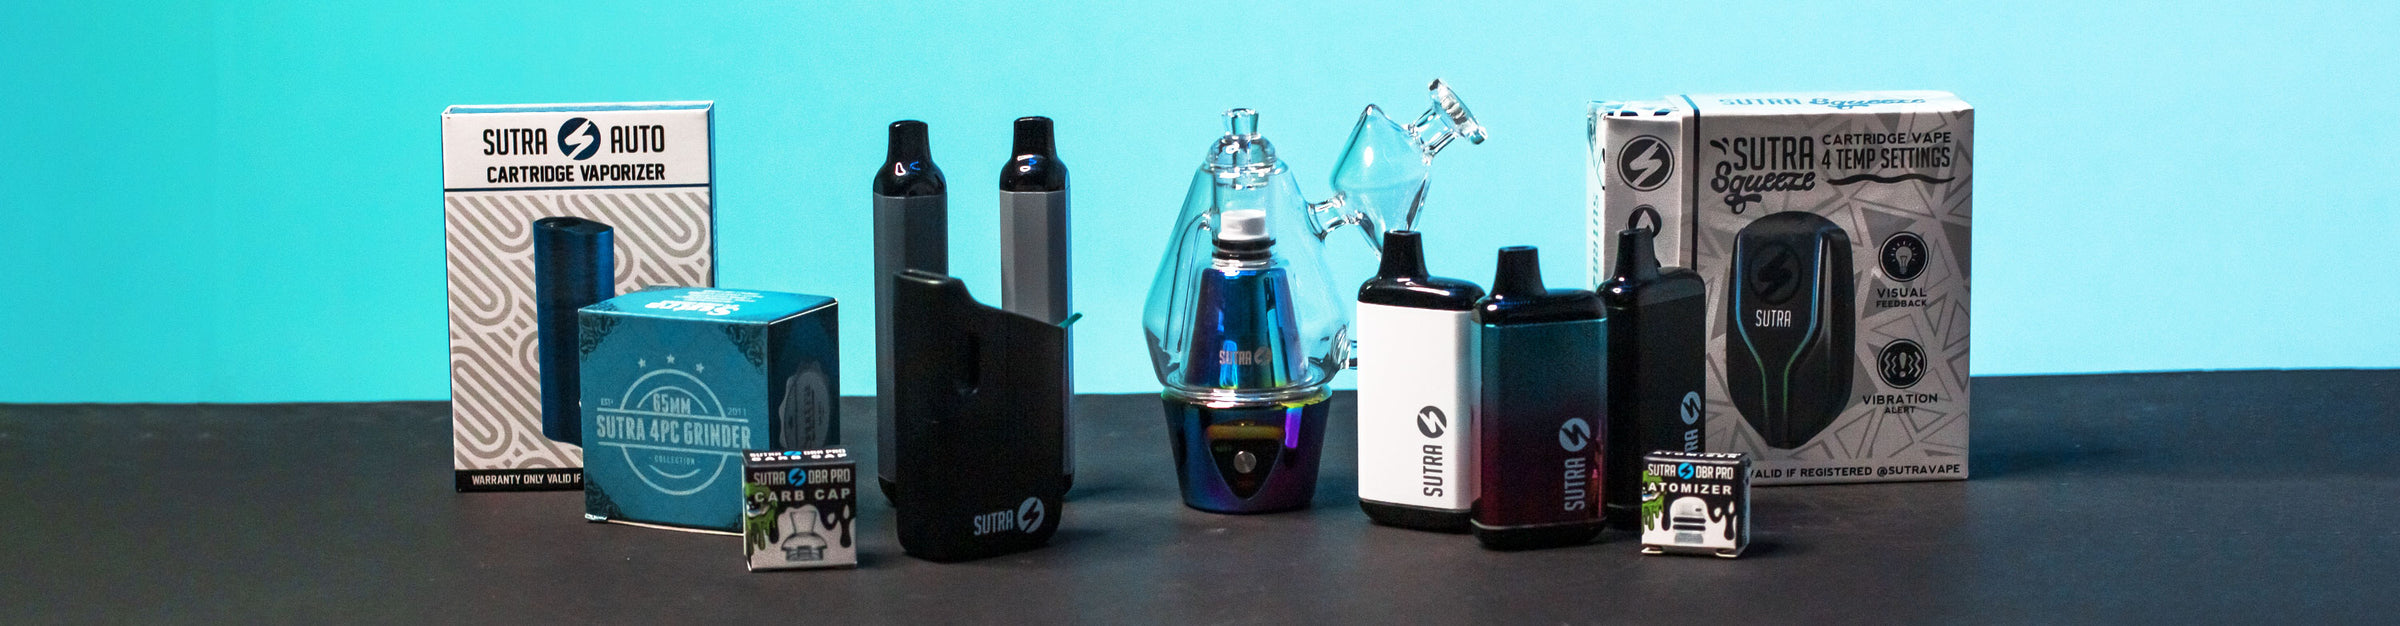 Got Vape Retail Sutra Collection standing on black display with teal blue studio lighting